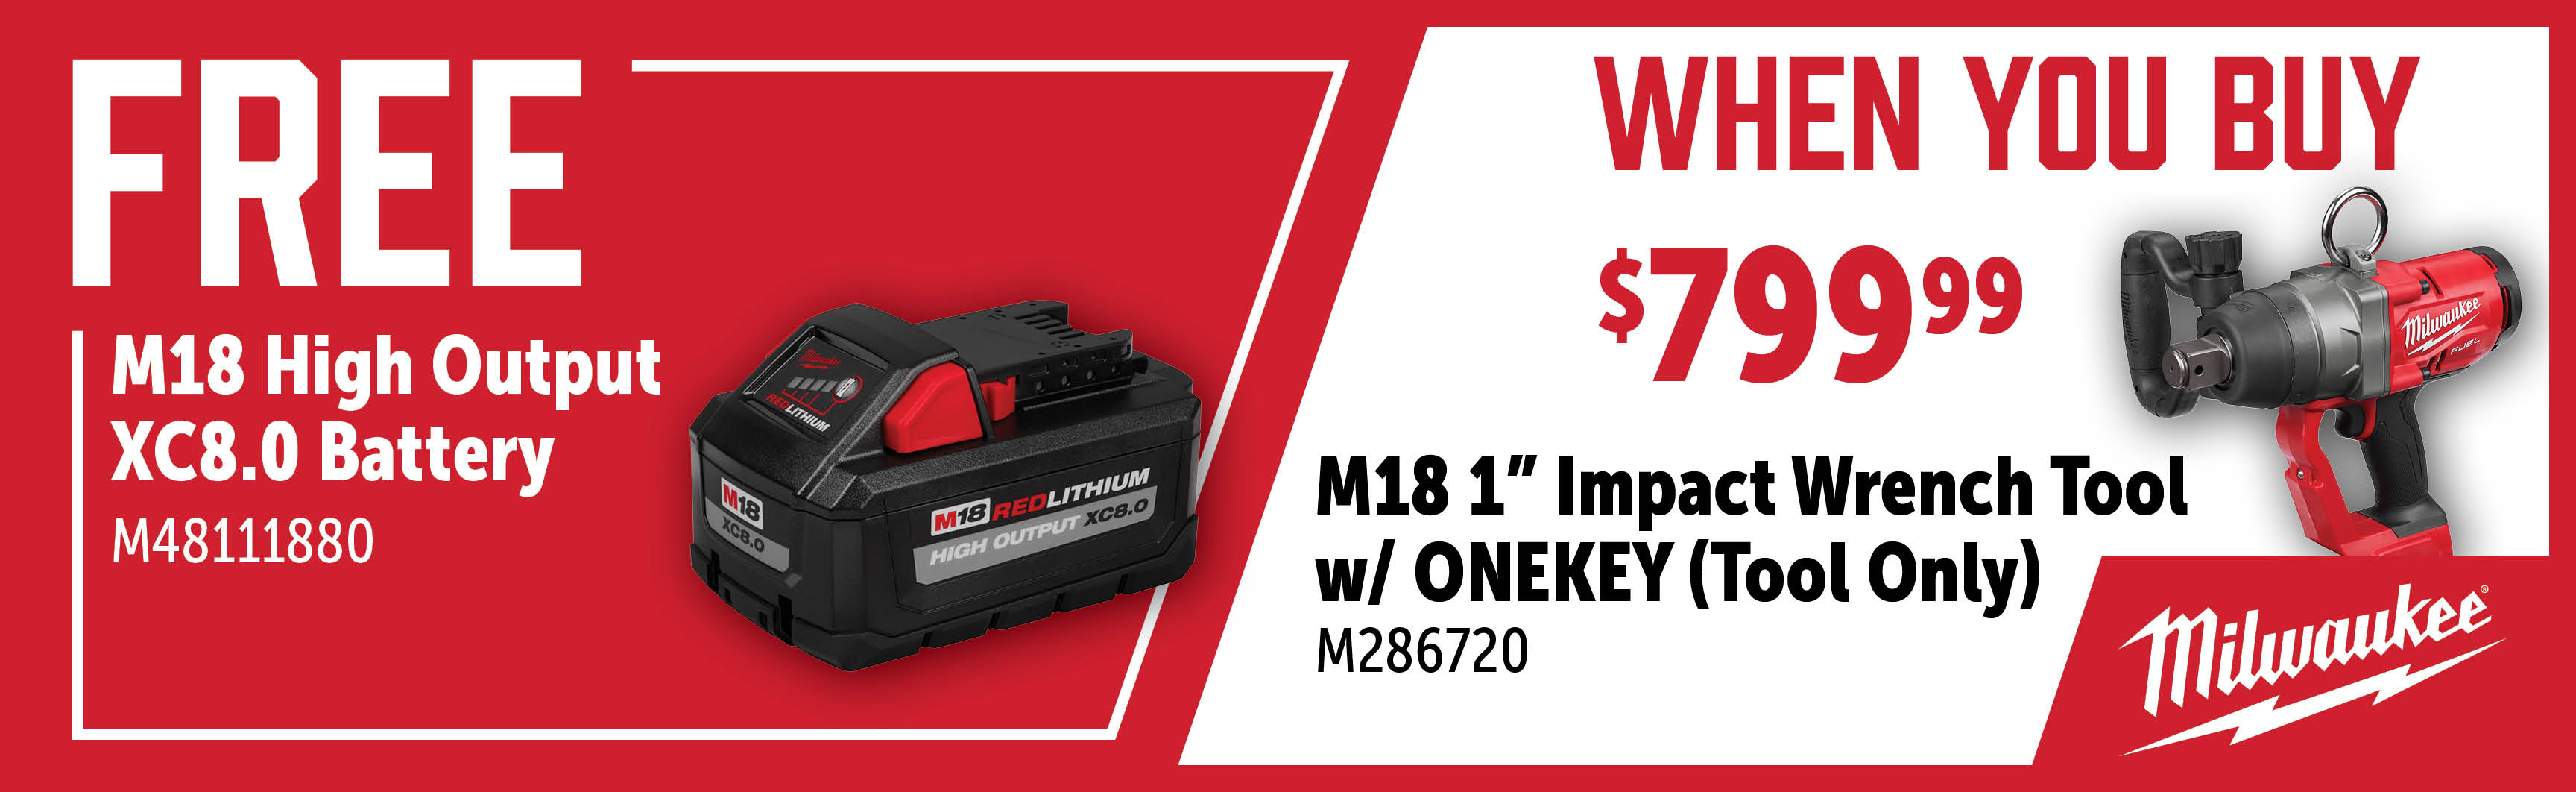 Milwaukee Aug-Oct: Buy a M286720 and Get a Free M48111880